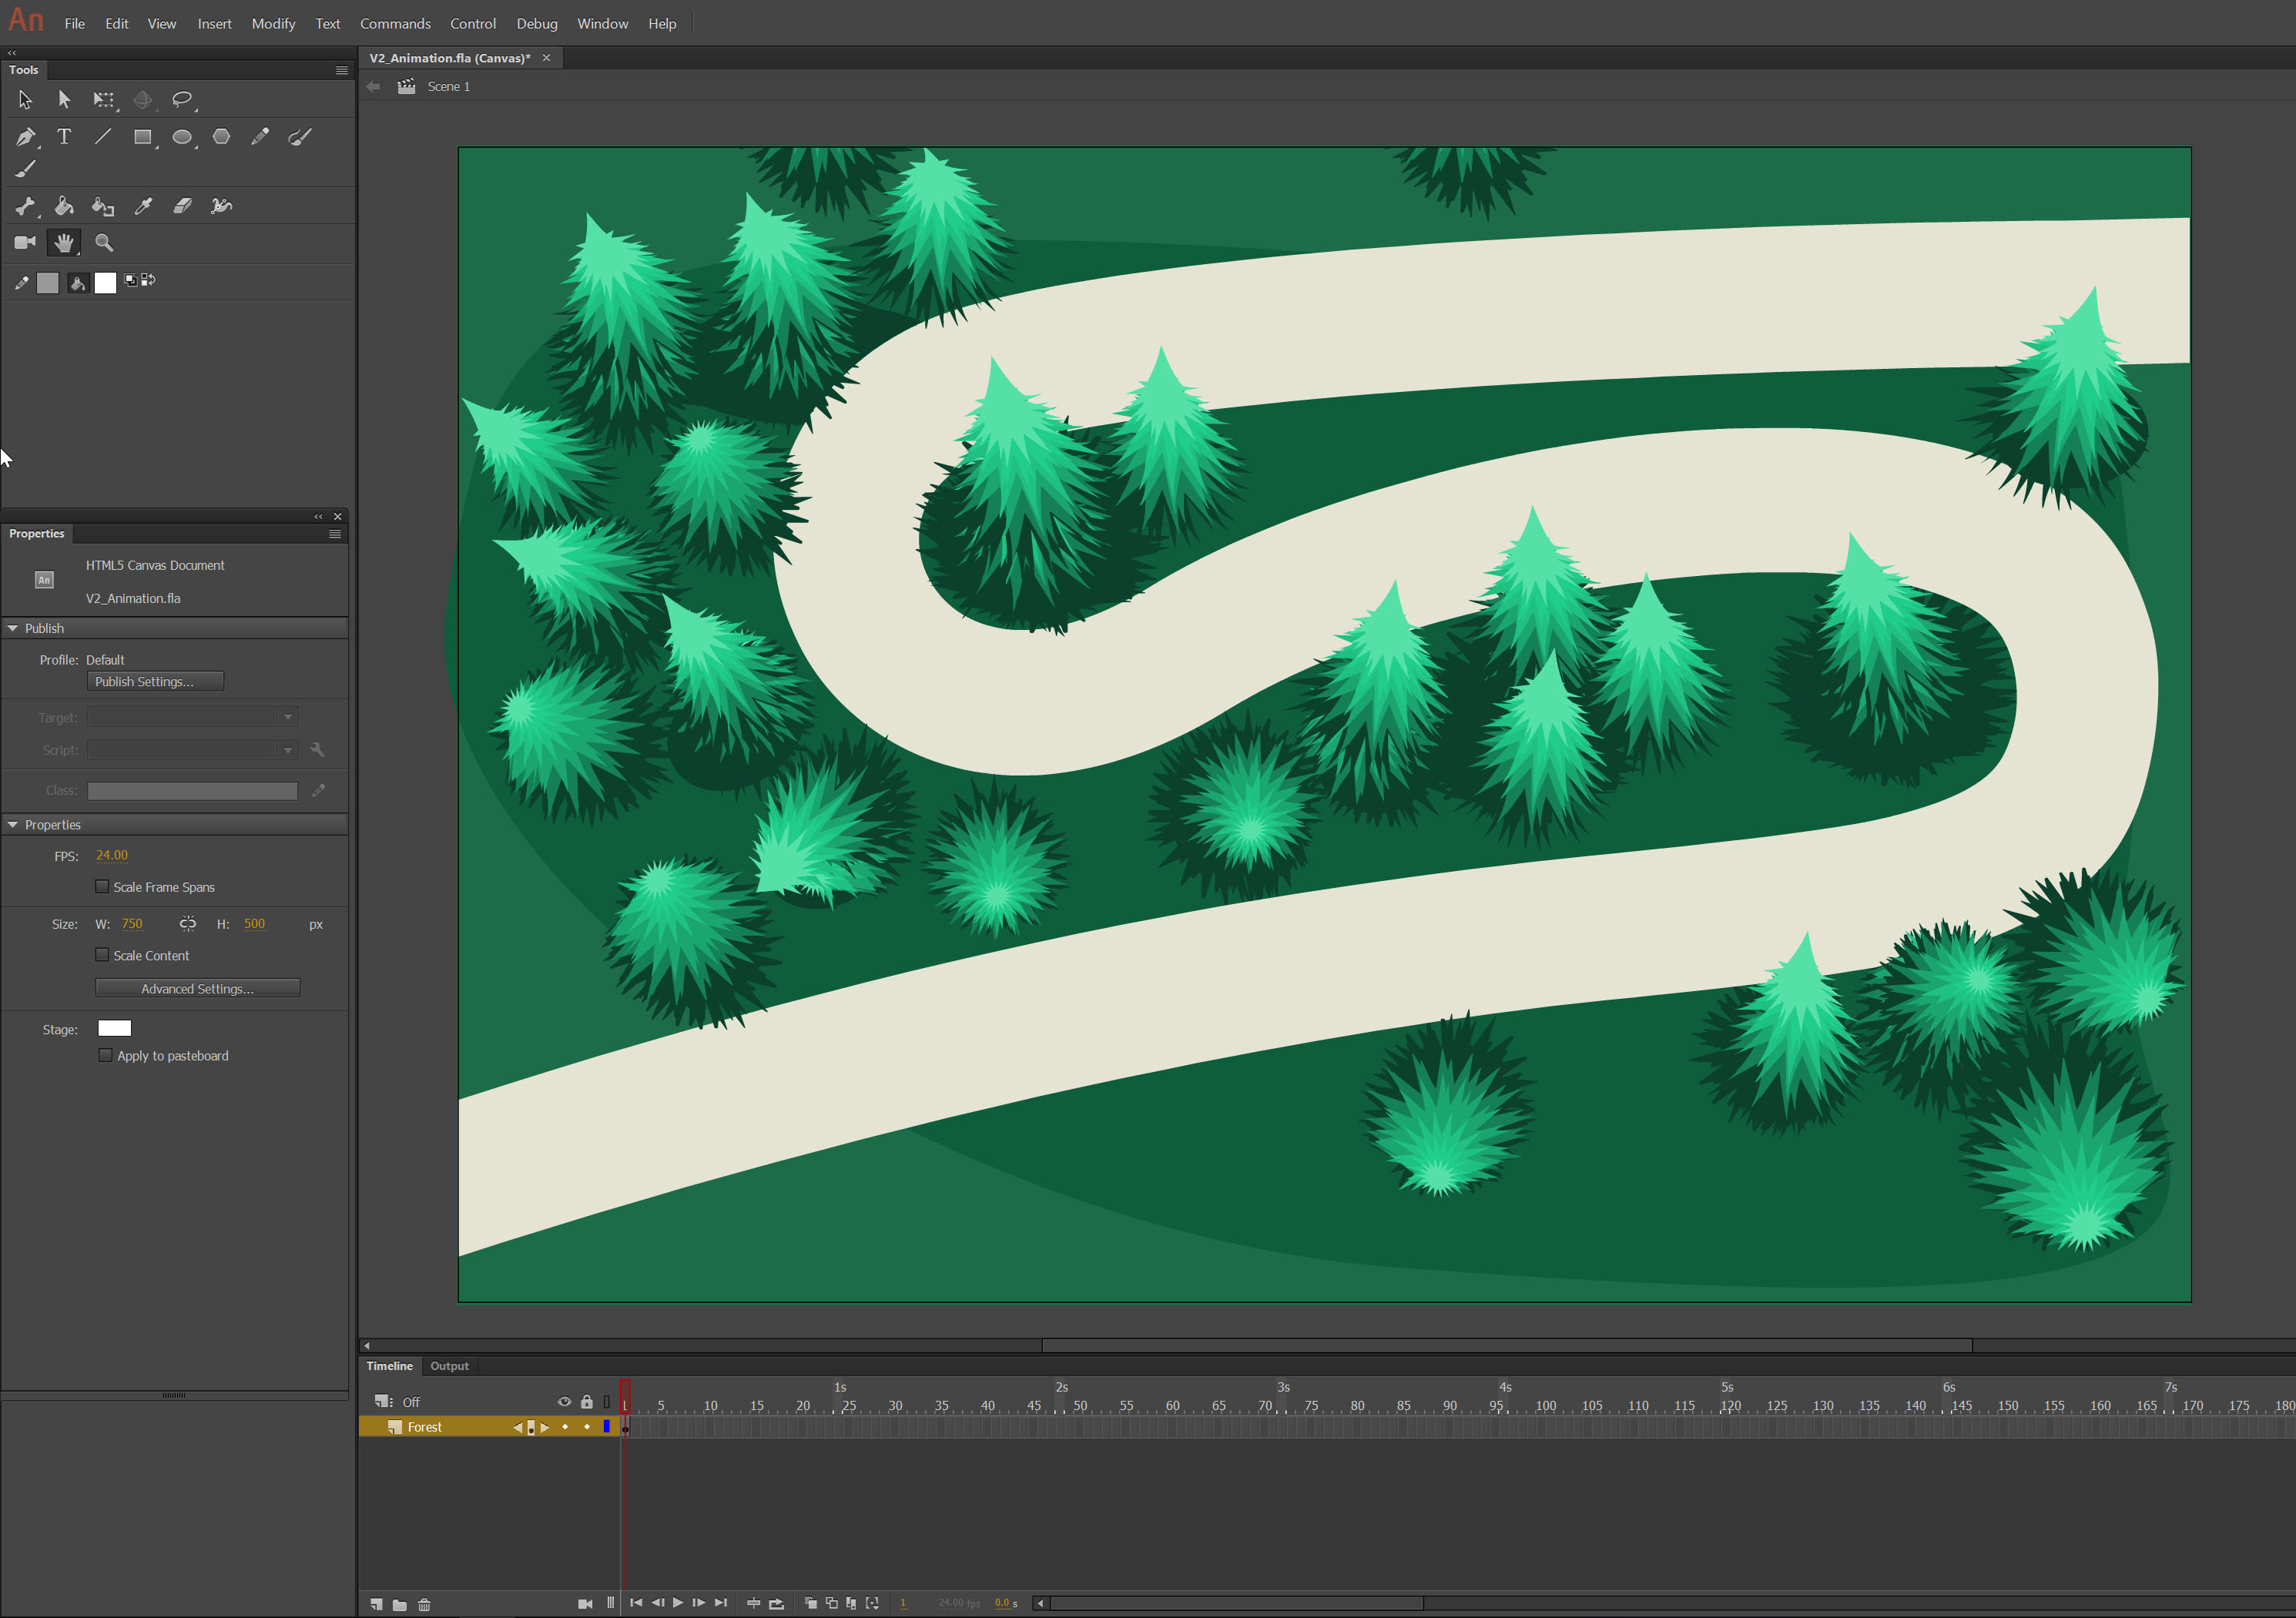 How to create motion paths in Adobe Animate - tutorial